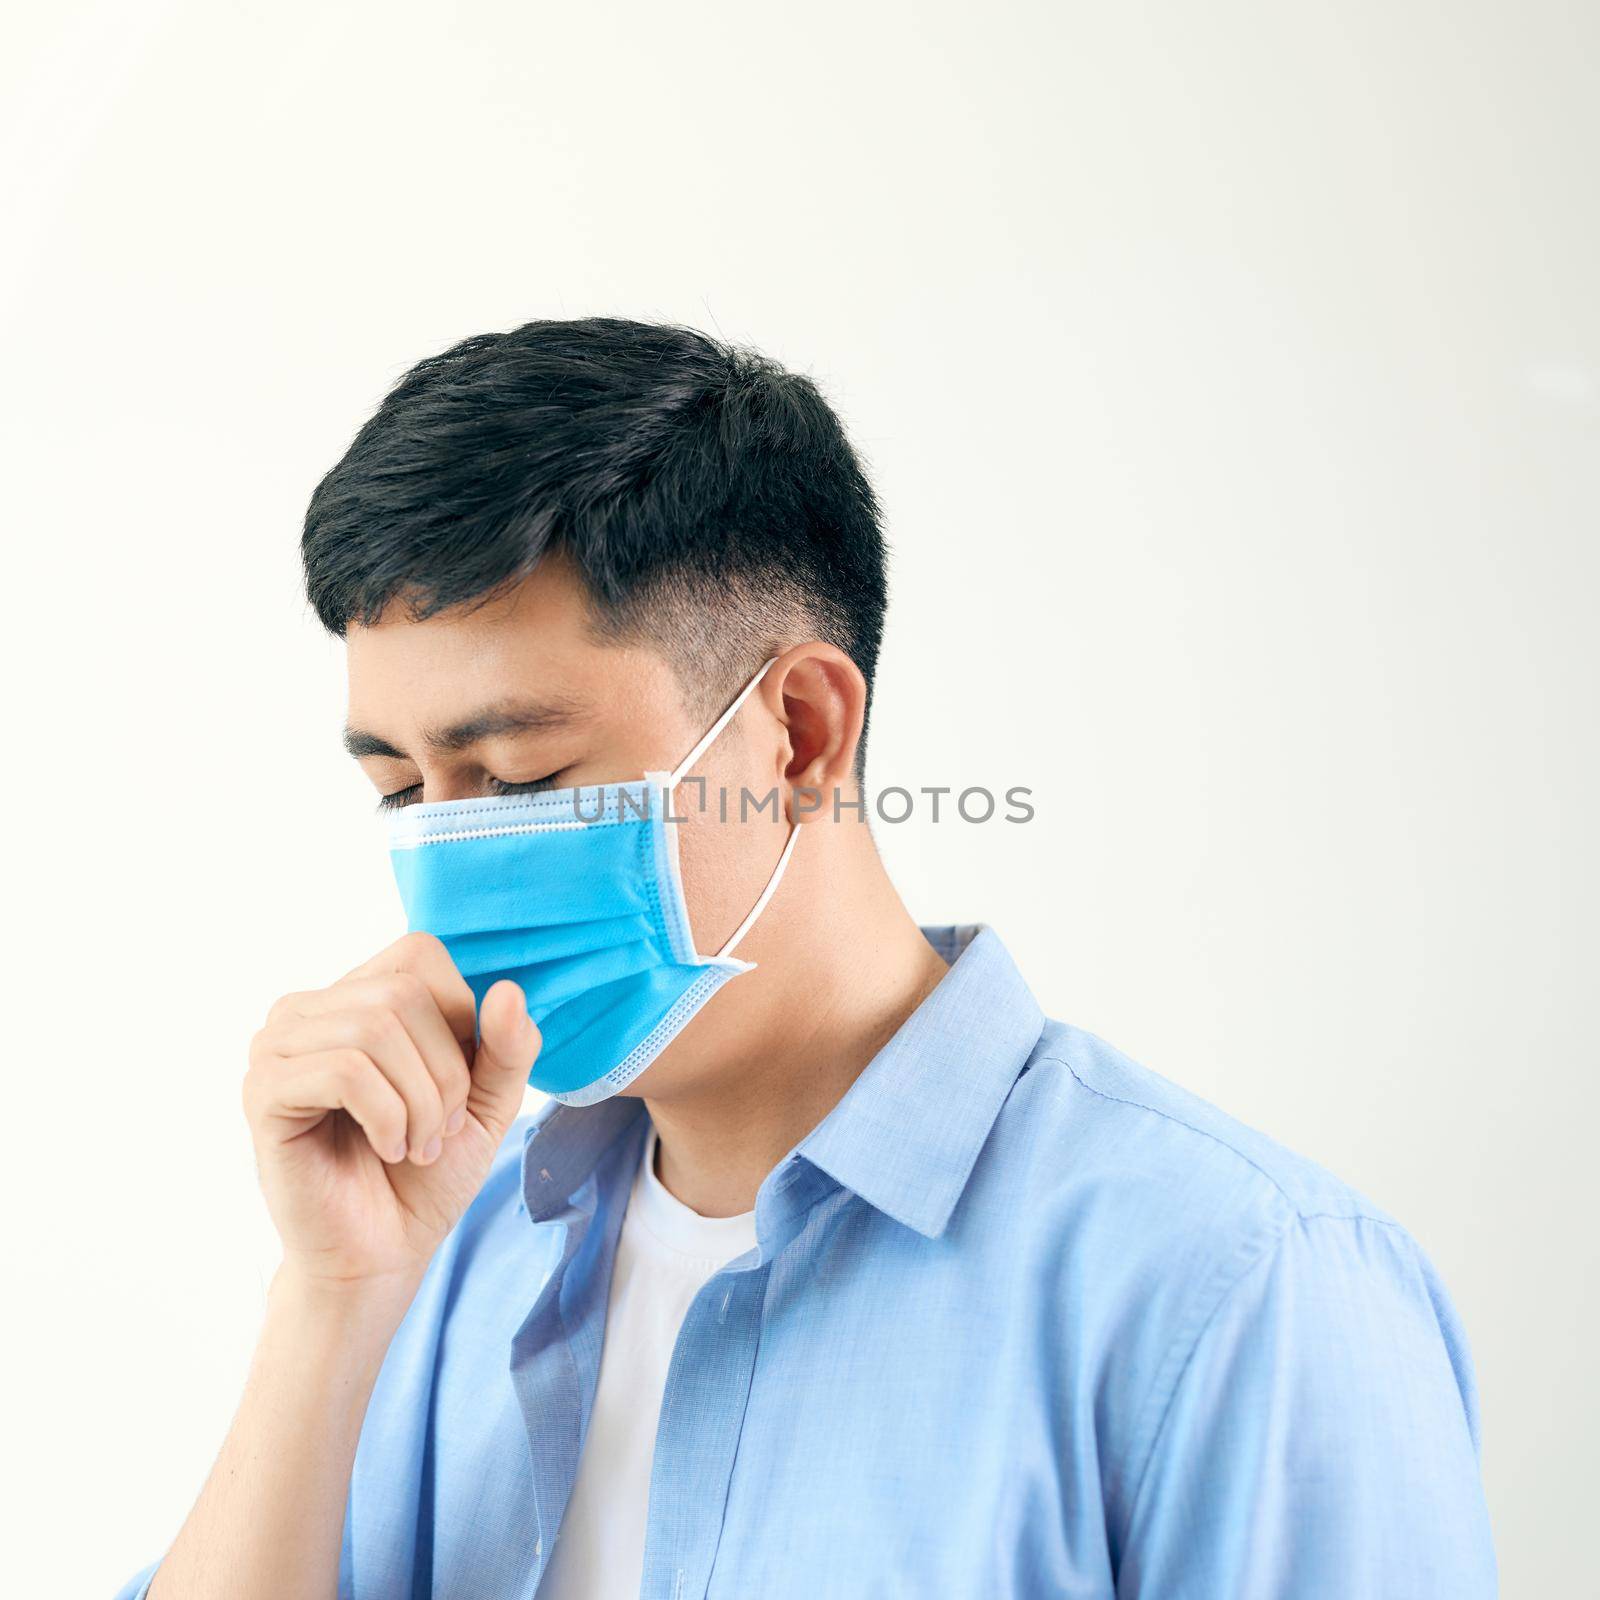 Asian man wearing surgical face mask coughing in subway station with crowded people walking pass. Wuhan coronavirus (COVID-19) outbreak prevention by makidotvn